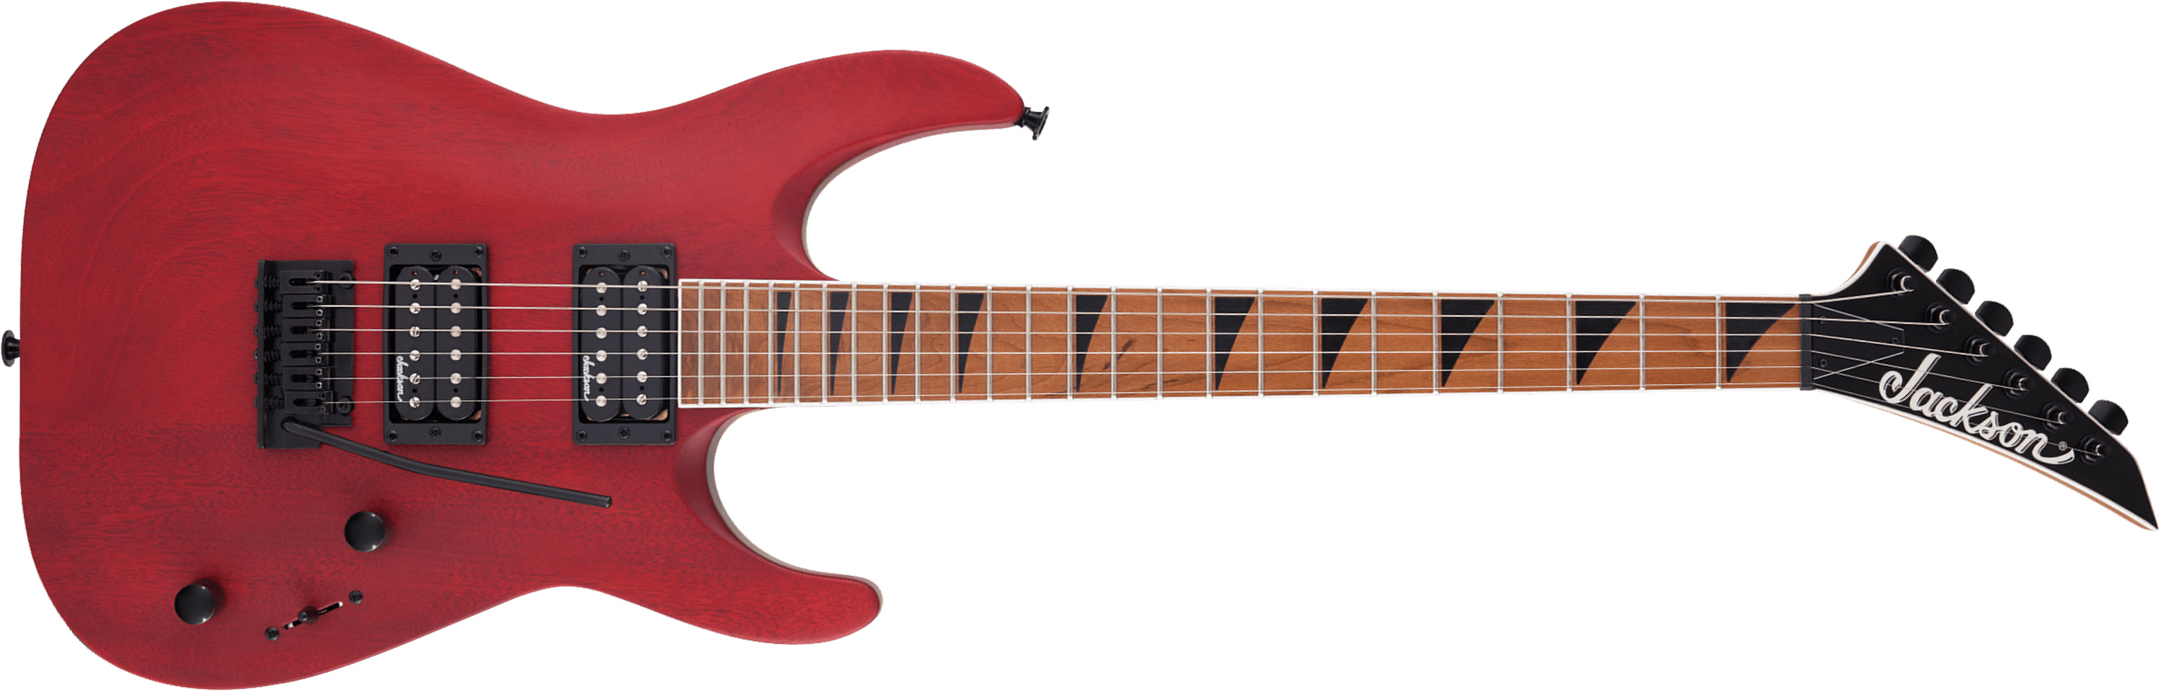 Jackson Dinky Js24 Dkam Arch Top 2h Trem Mn - Red Stain - Str shape electric guitar - Main picture